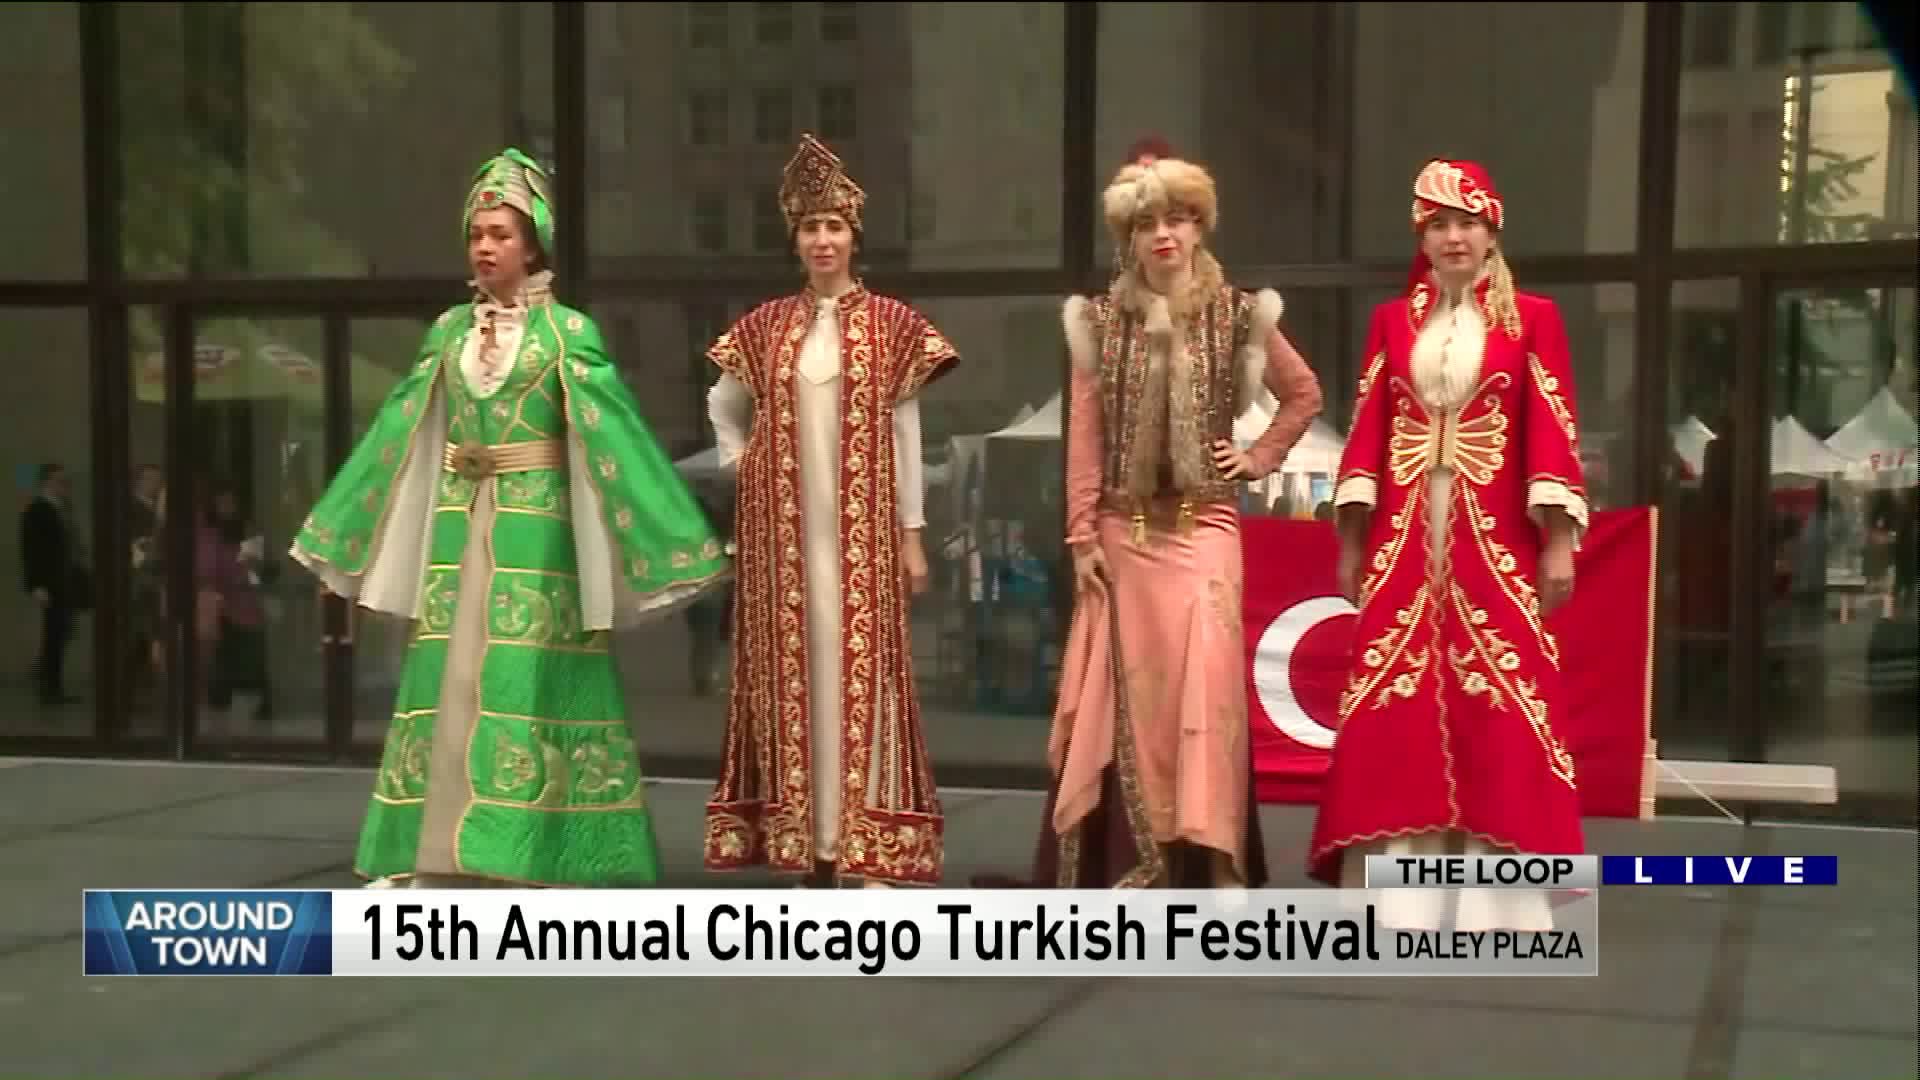 Around Town checks out the 15th Annual Chicago Turkish Festival